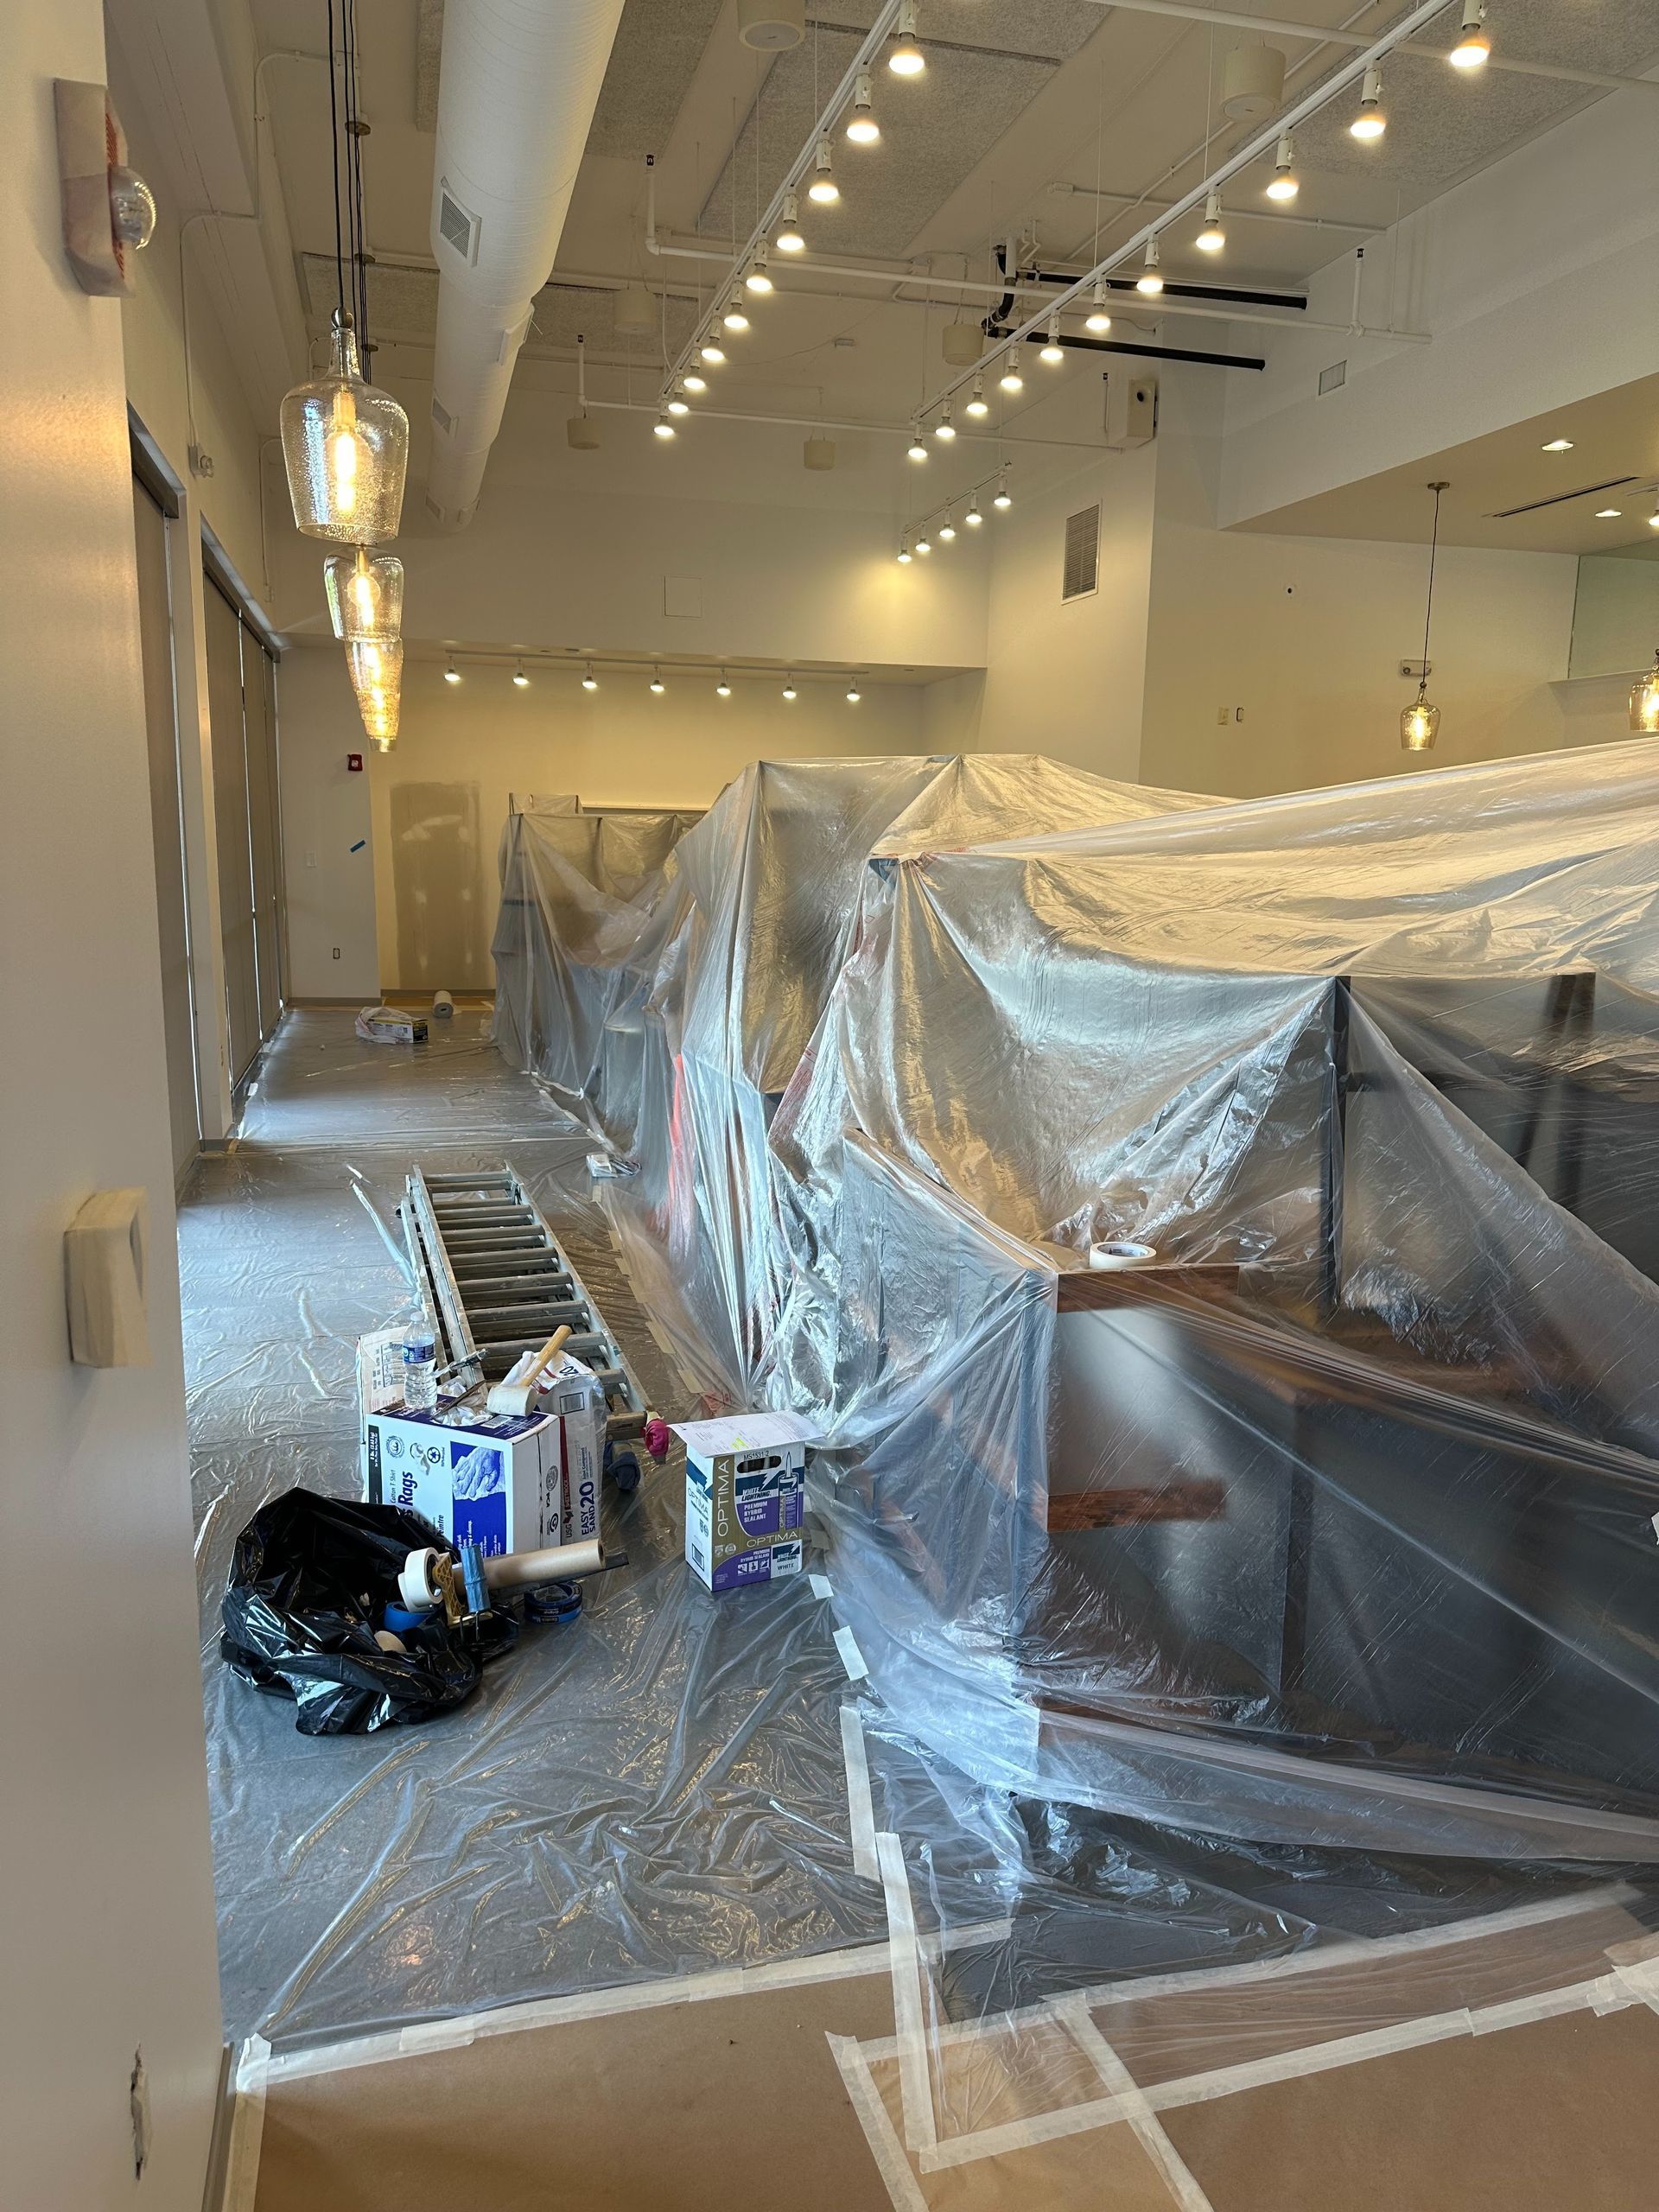 A large room is being painted and covered in plastic.